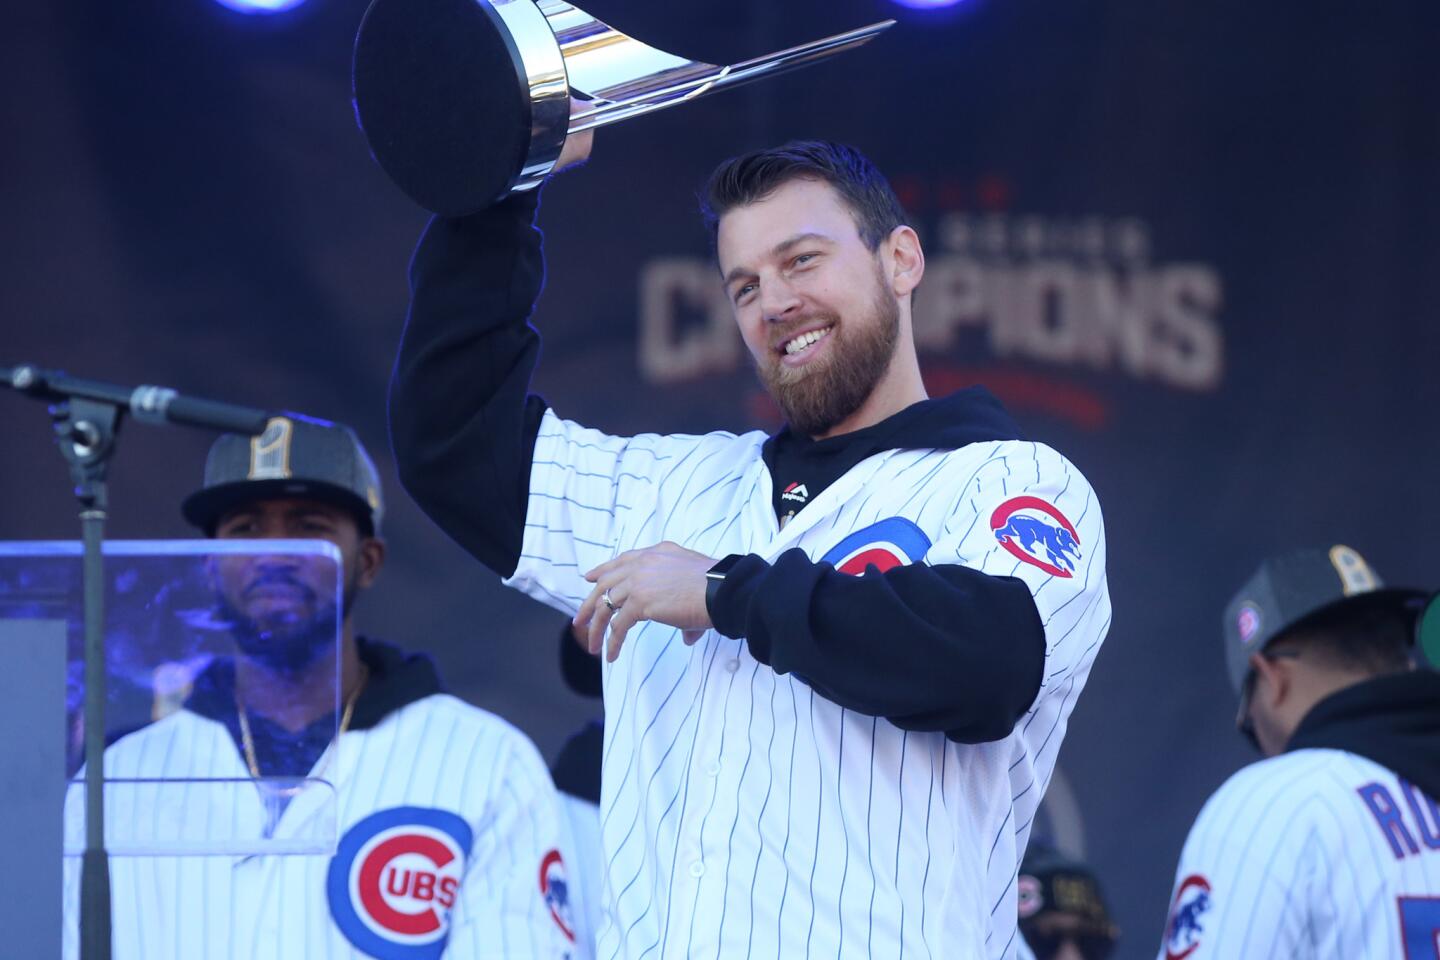 Ben Zobrist came to my school today. He's a class act : r/baseball